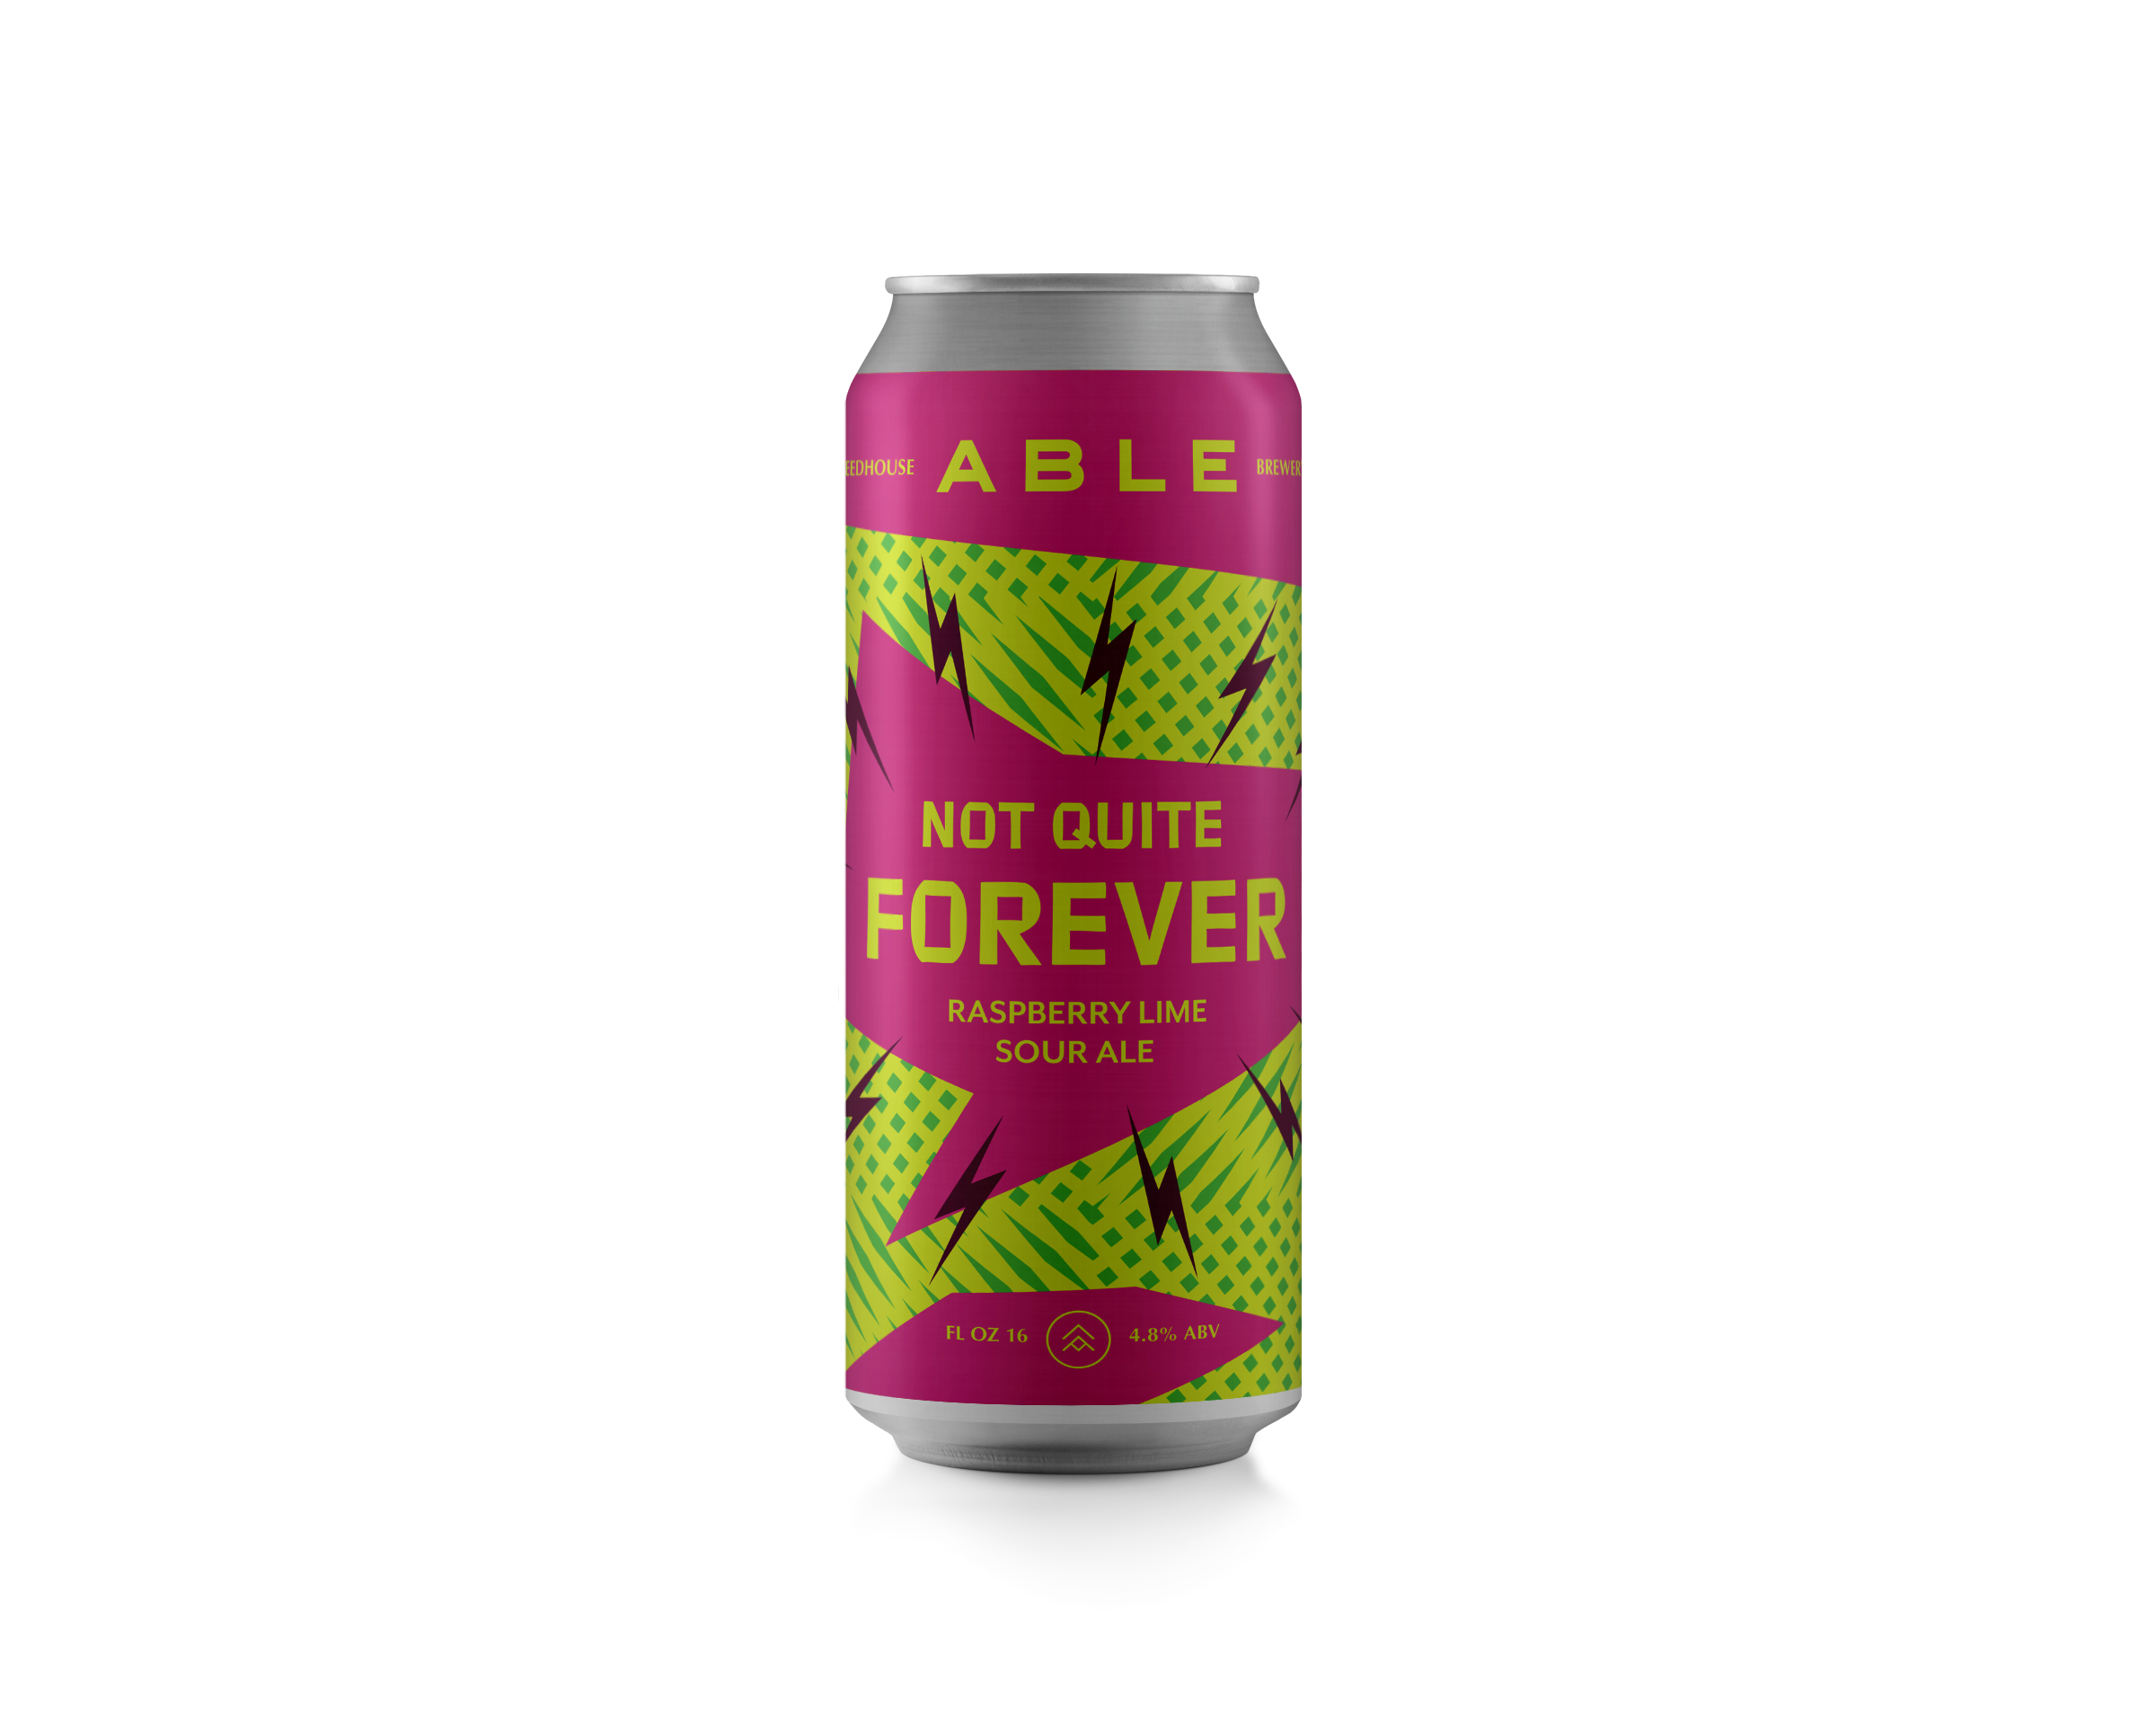 New Release from Able Seedhouse +Brewery Showcases Collaboration with Minneapolis Design Students